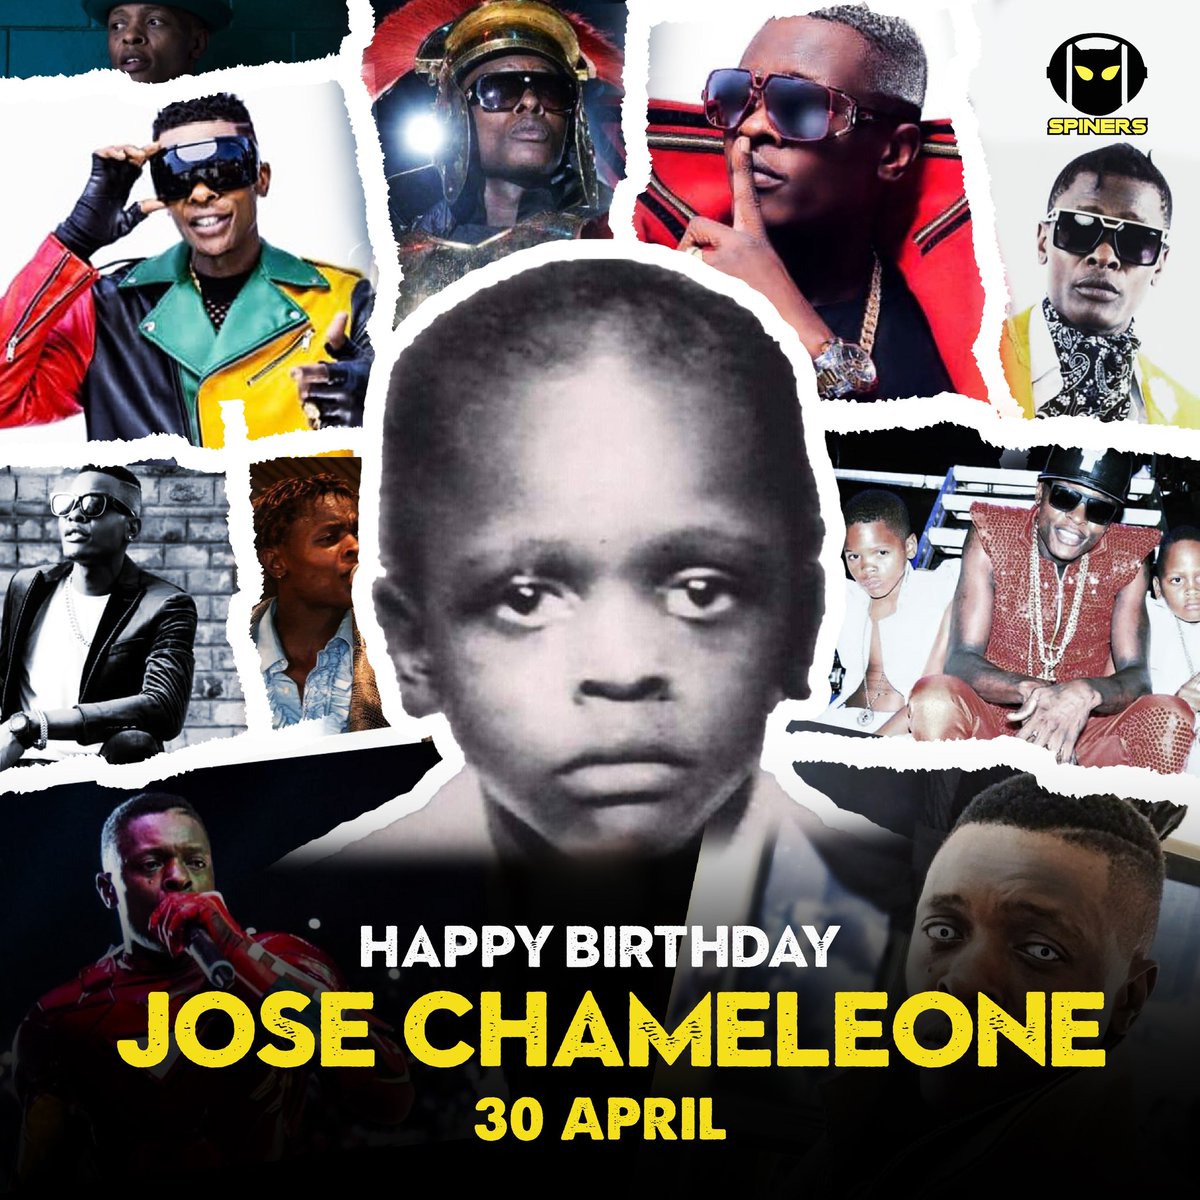 Jose Chameleone 👑

 Happy Birthday

May Your Art Continue To Flourish With Every Passing Year‼️

#weareSPINERS || spiners.net